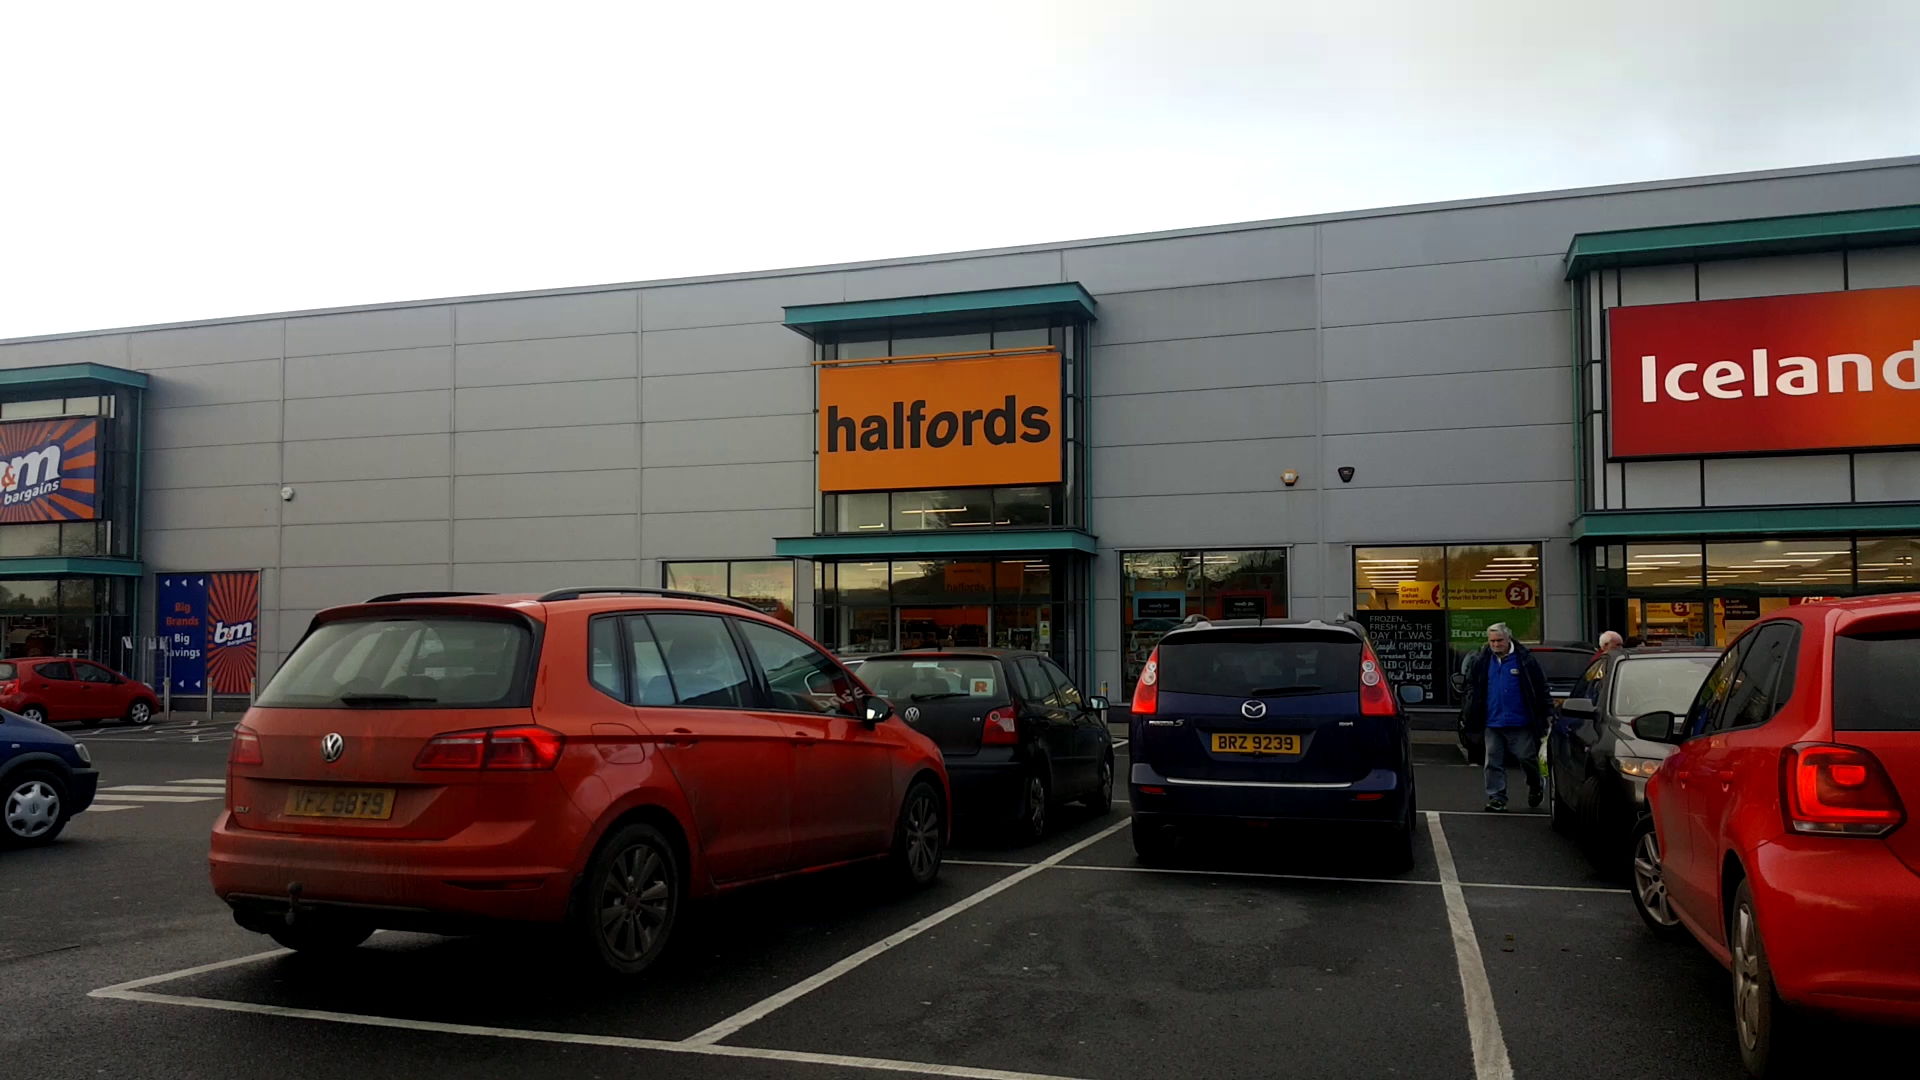 Halfords - Cookstown